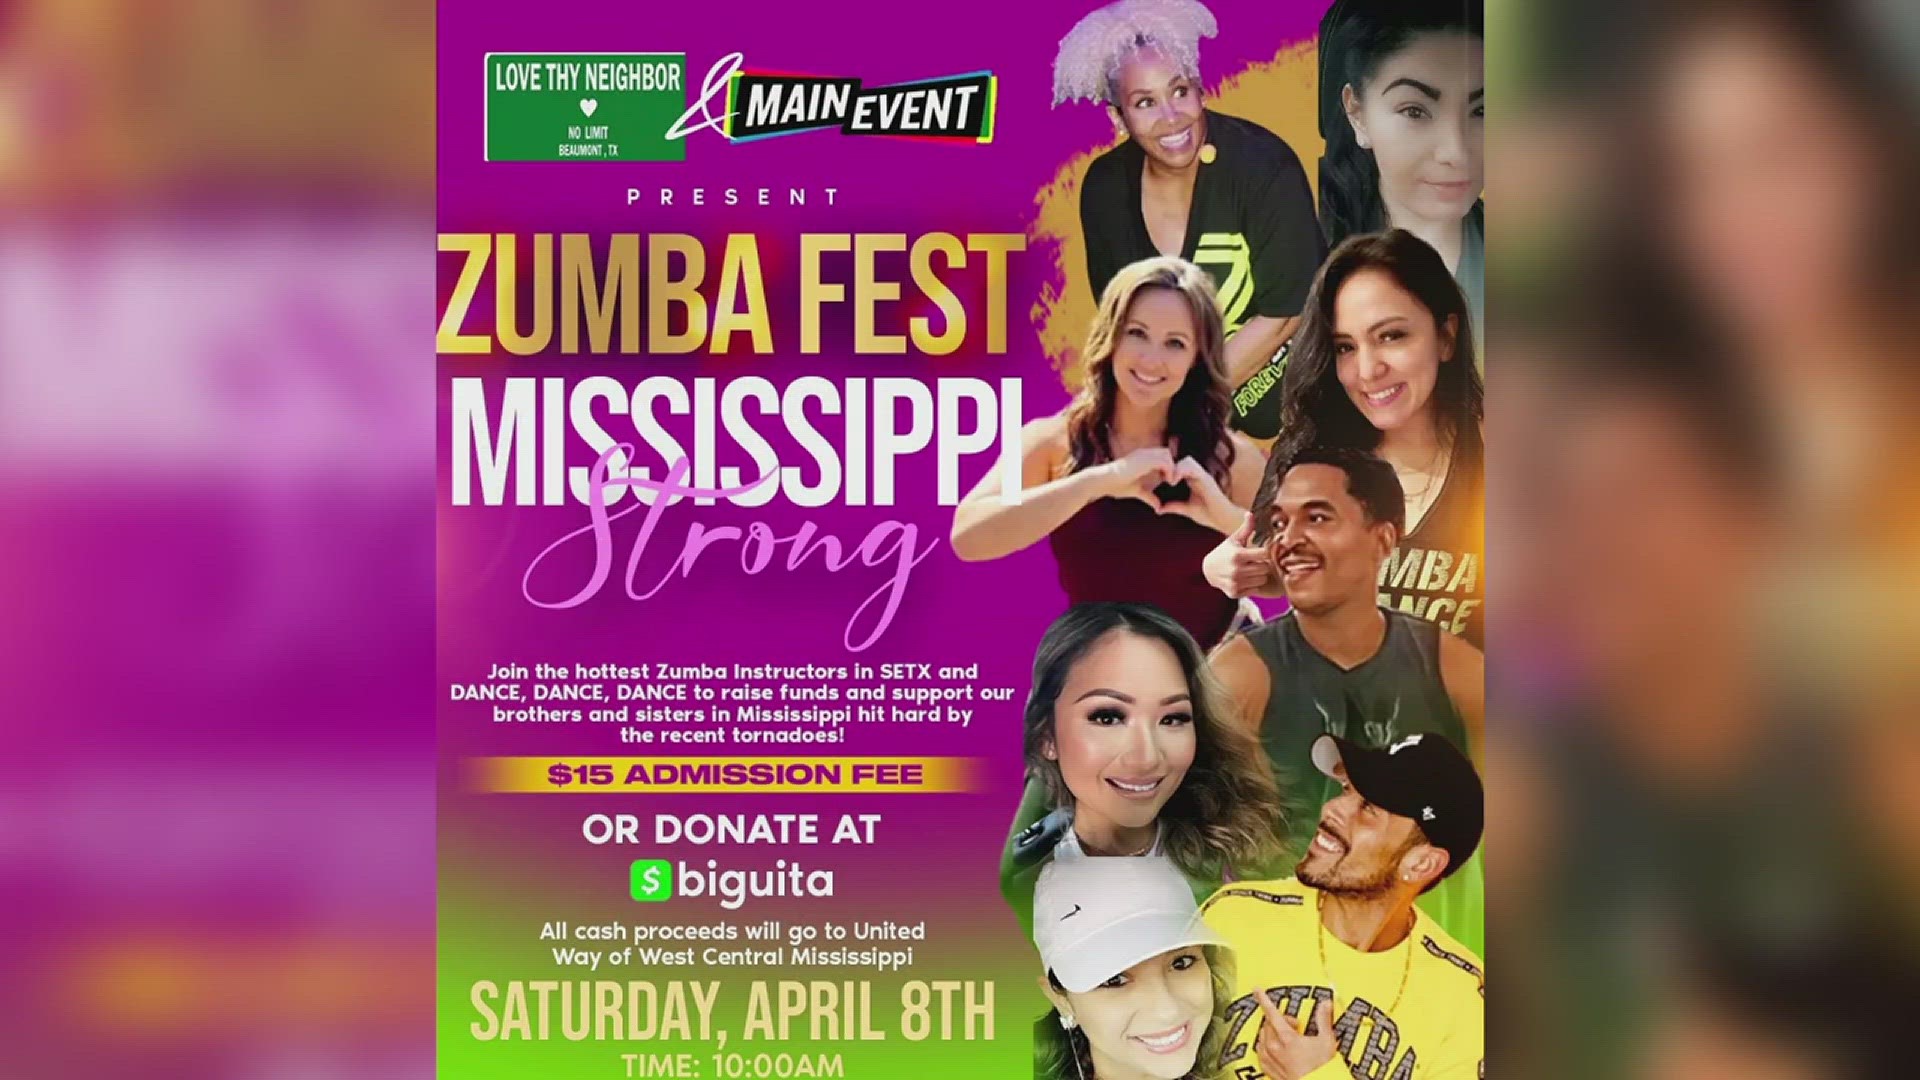 Love Thy Neighbor hosting Zumba Fest at Main Event to raise for Mississippi tornado victims | 12newsnow.com